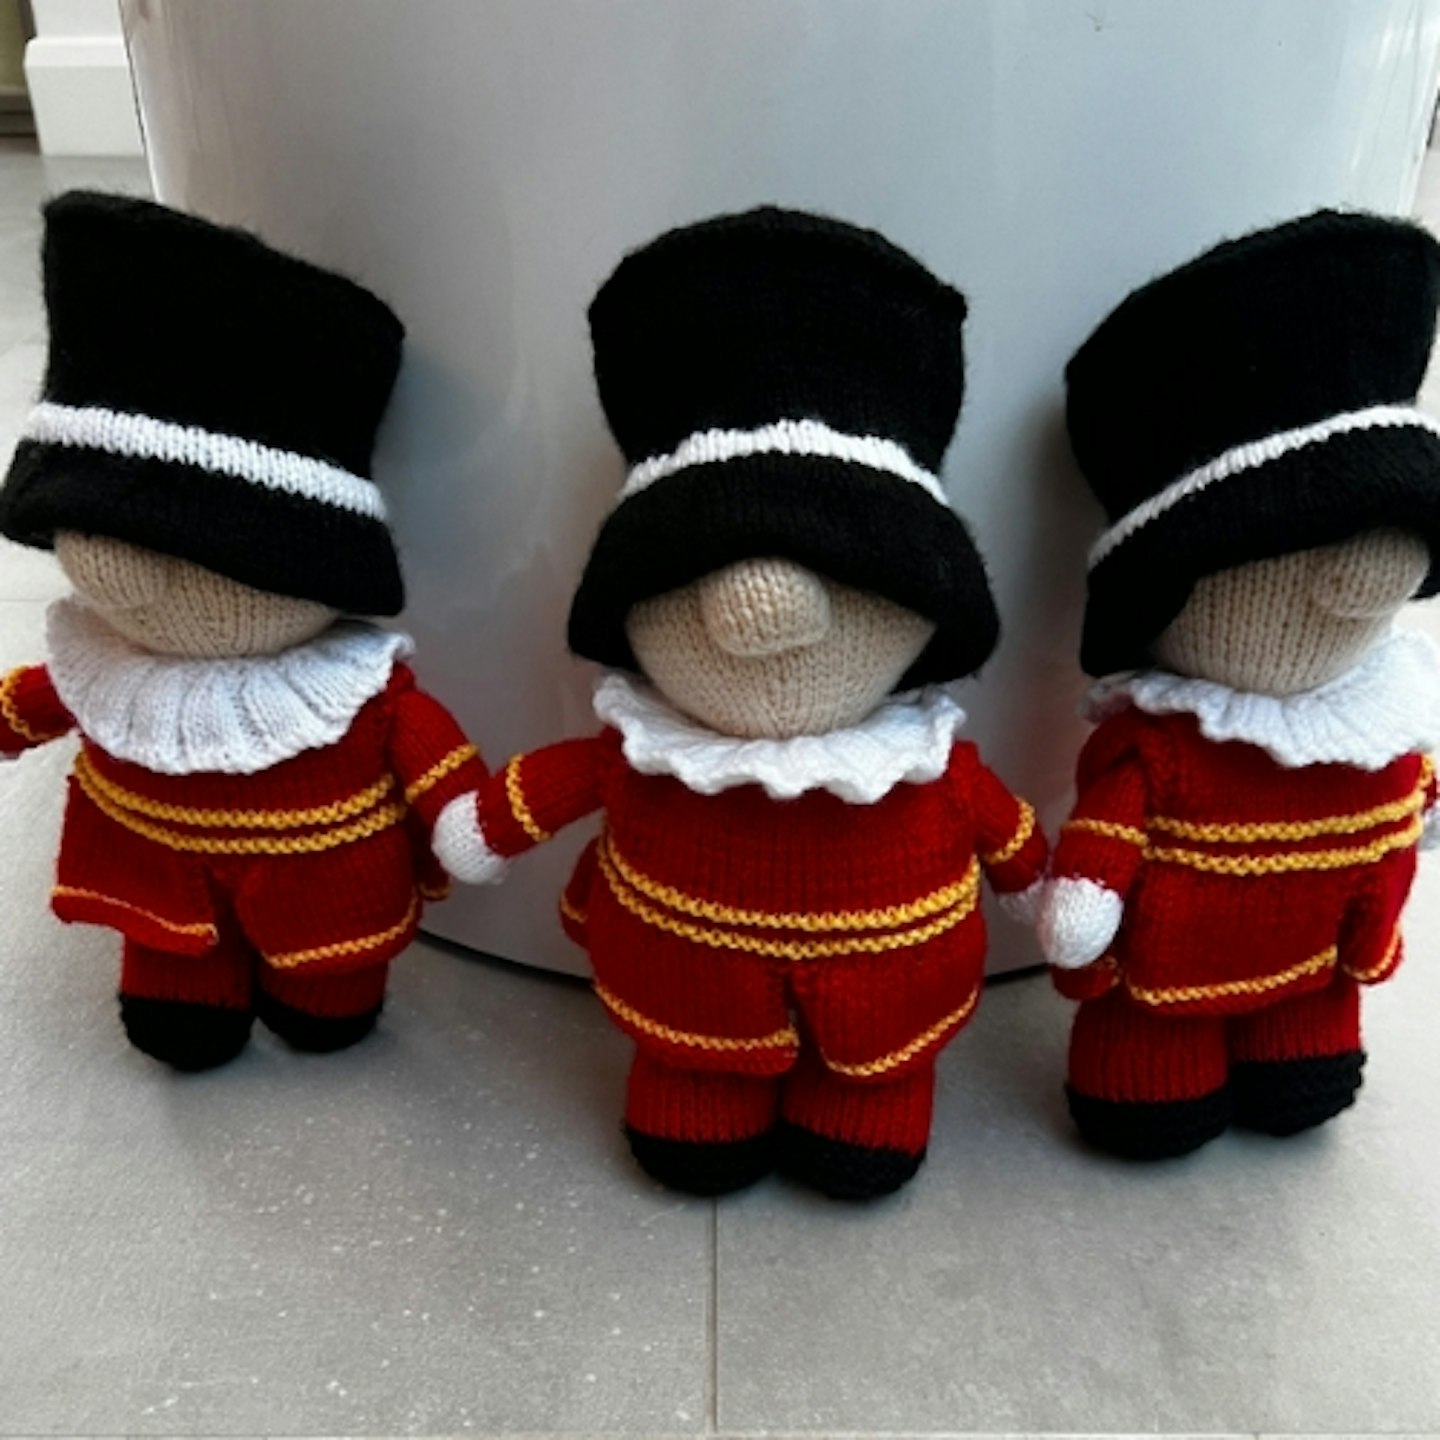 Sold for charity - Handmade Coronation Beefeater